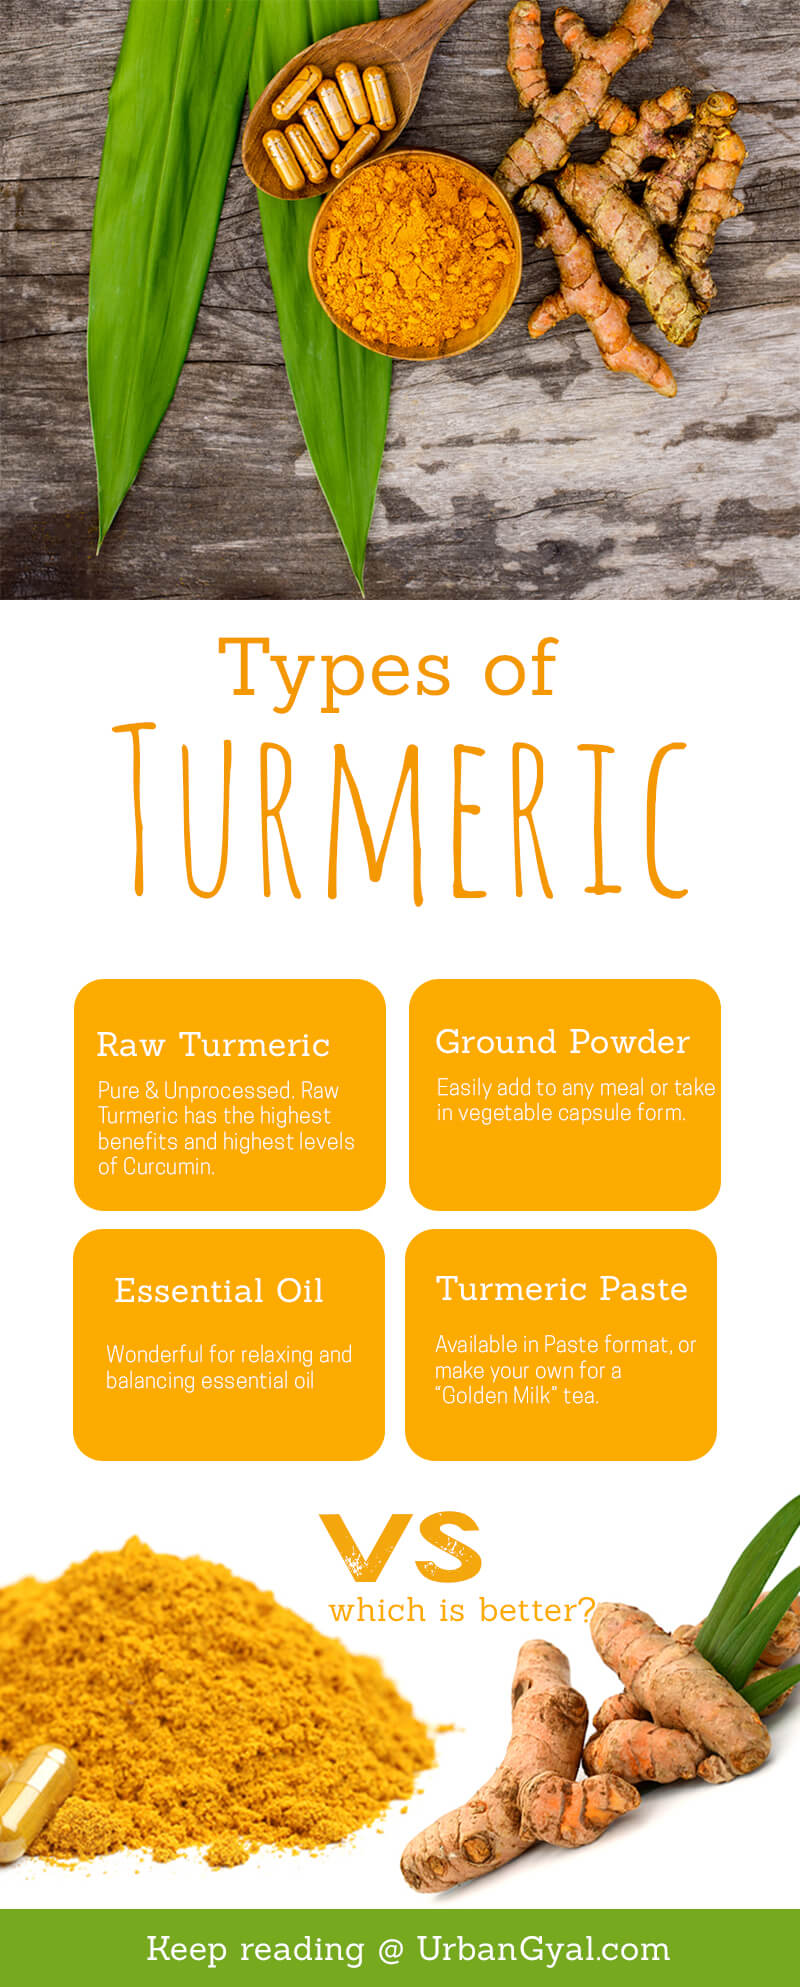 Types of Turmeric, Which is Better Raw or Ground Turmeric?